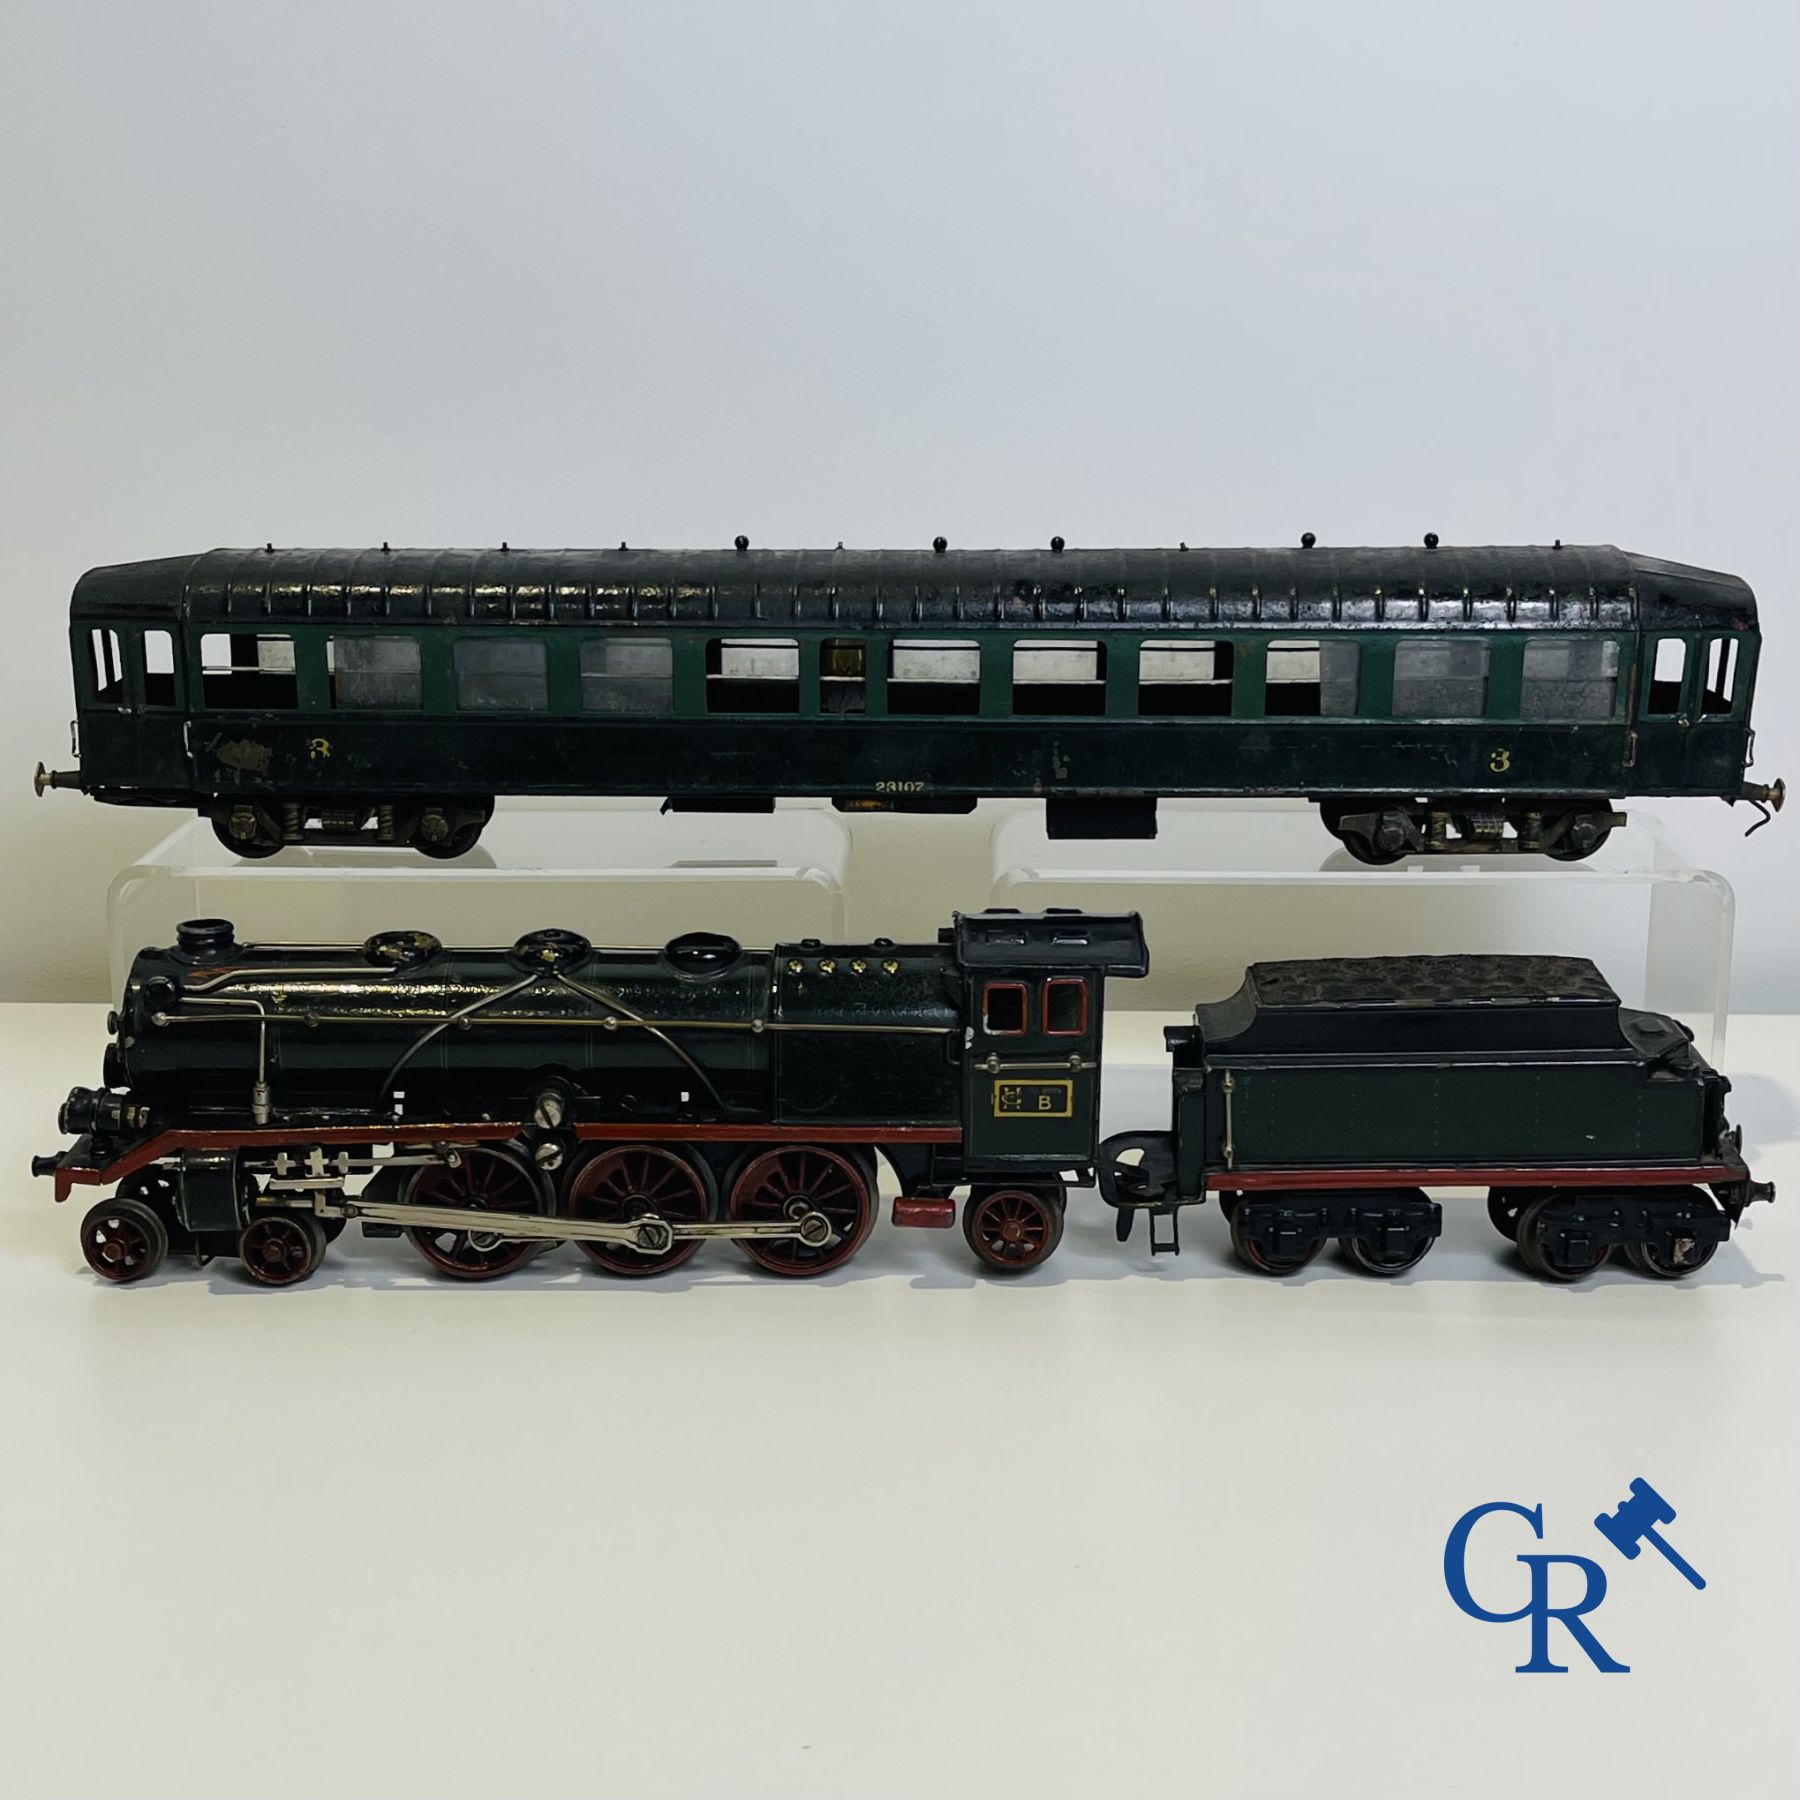 Old toys: Märklin, Locomotive with towing tender and dining car.
About 1930.